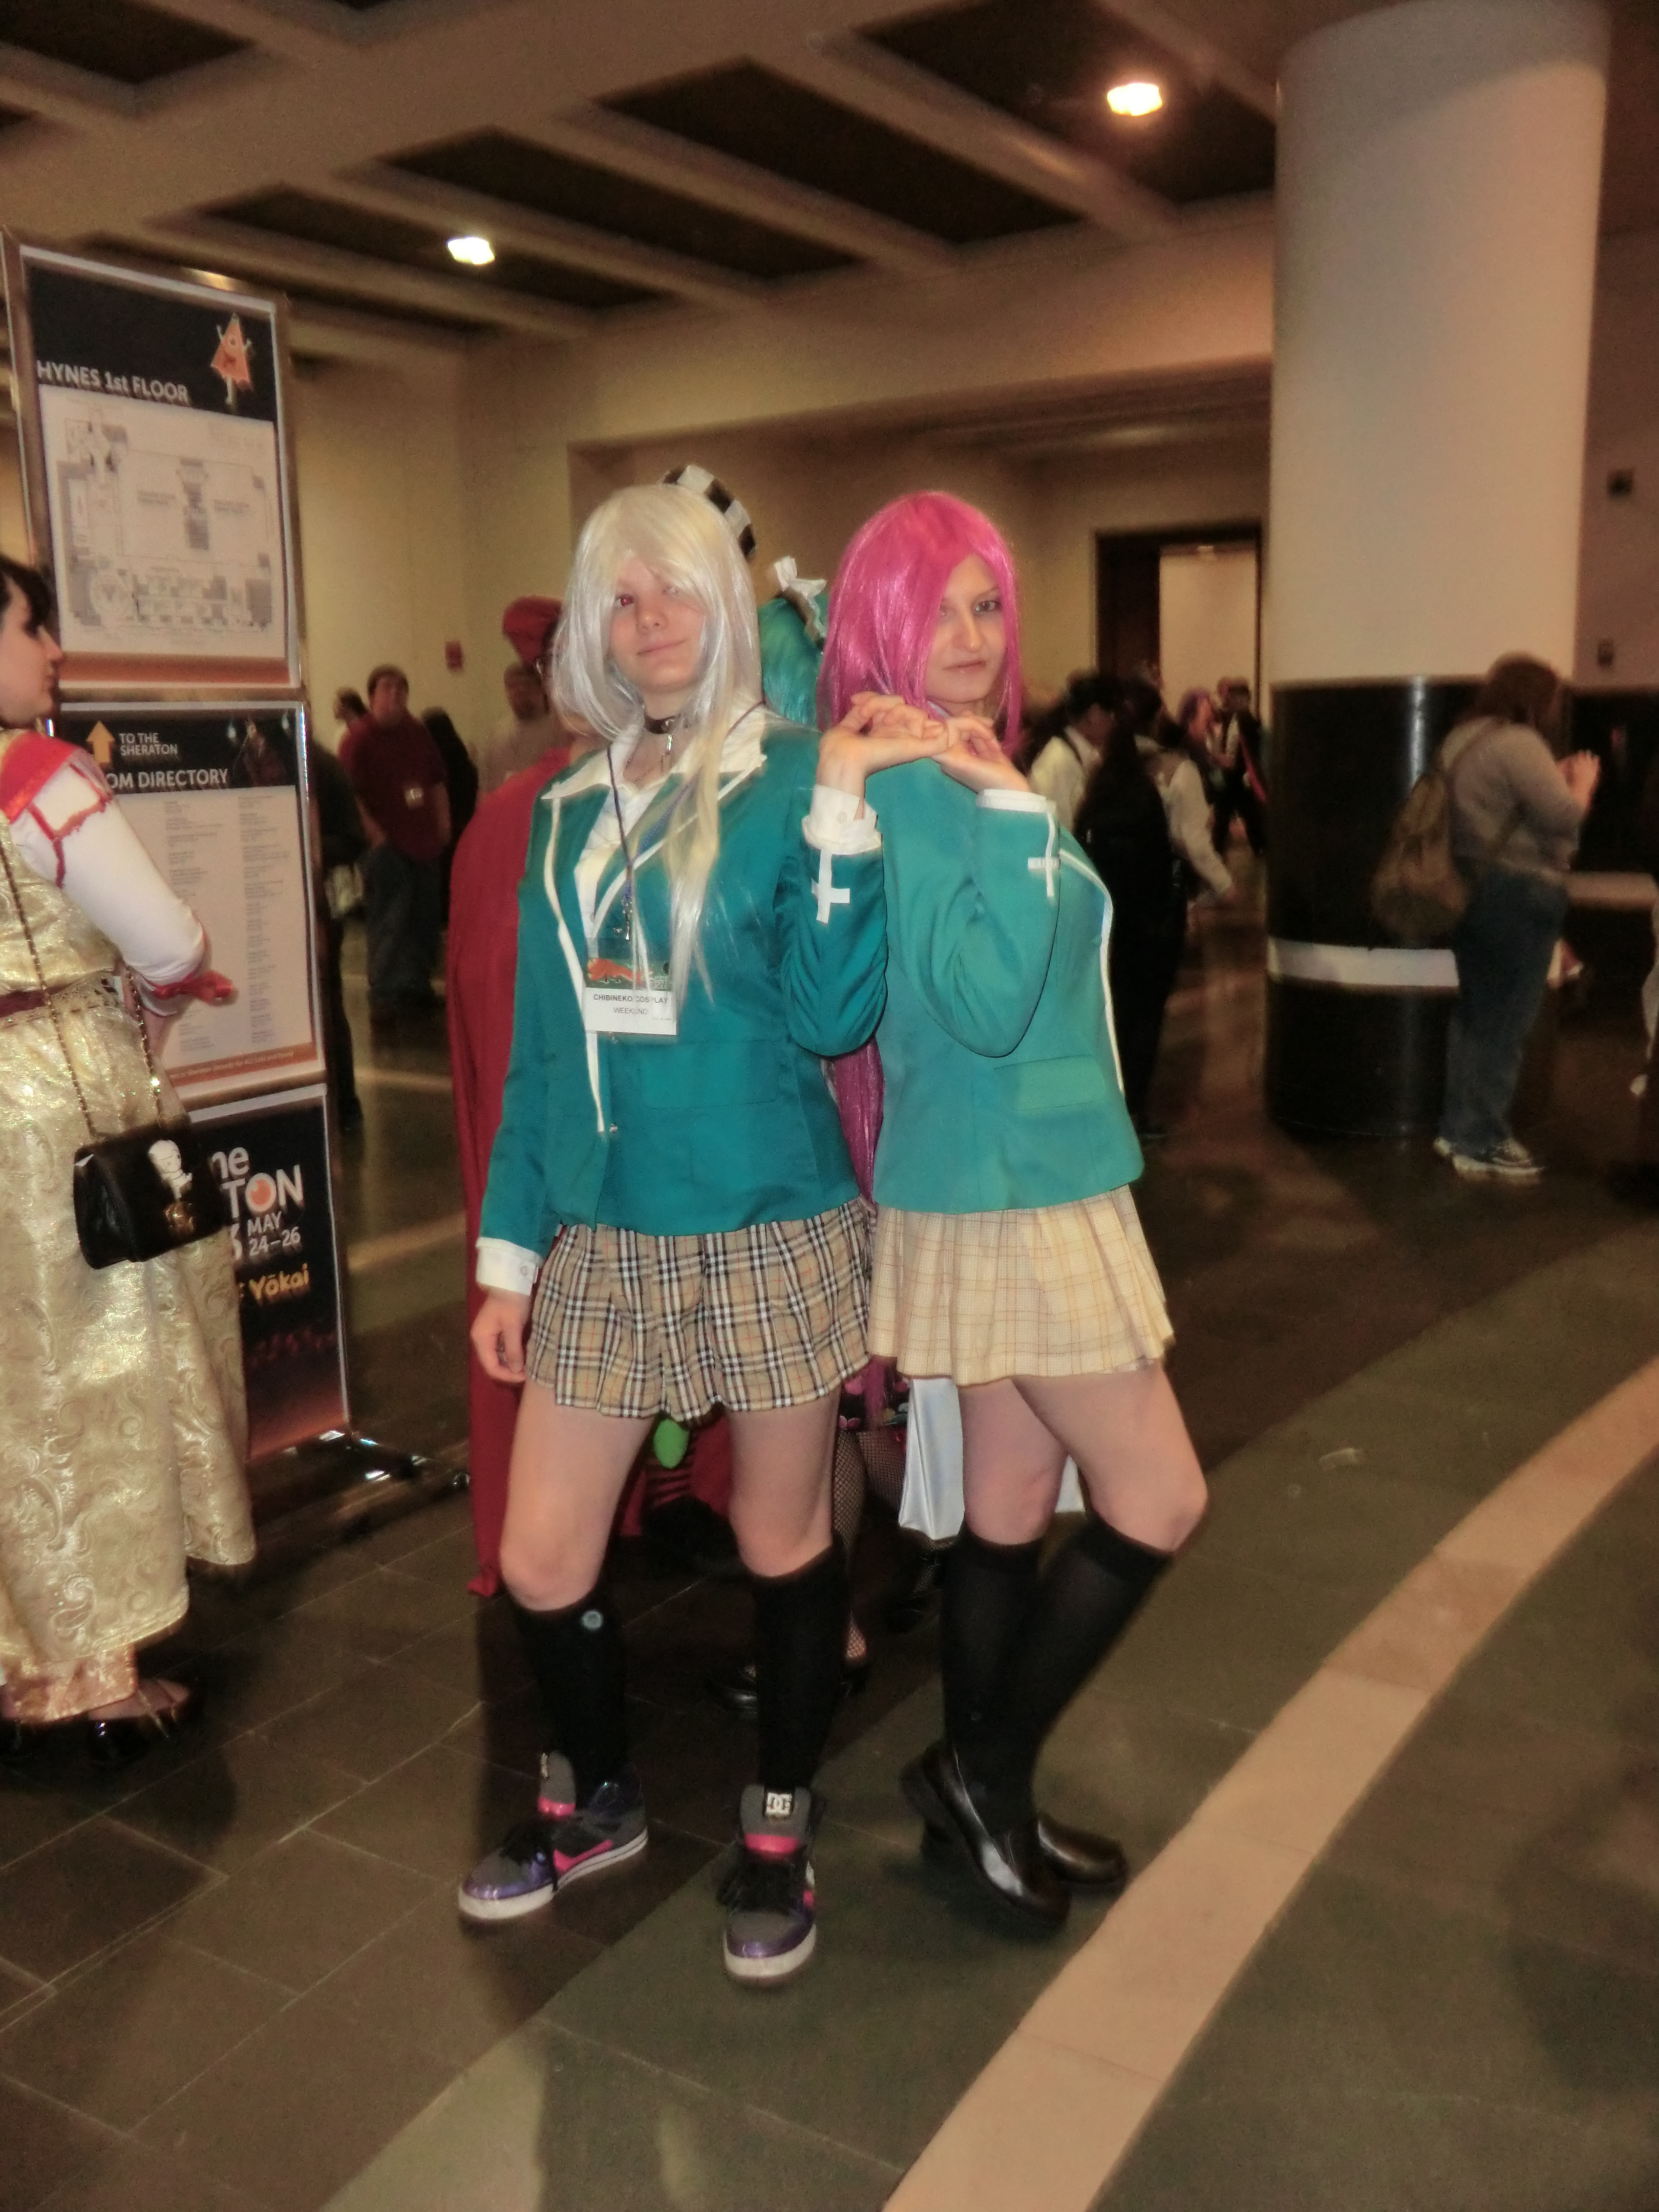 File:Cosplay of Inner and Outer Moka from Rosario + Vampire at Anime Boston  2013 (8862528927).jpg - Wikimedia Commons